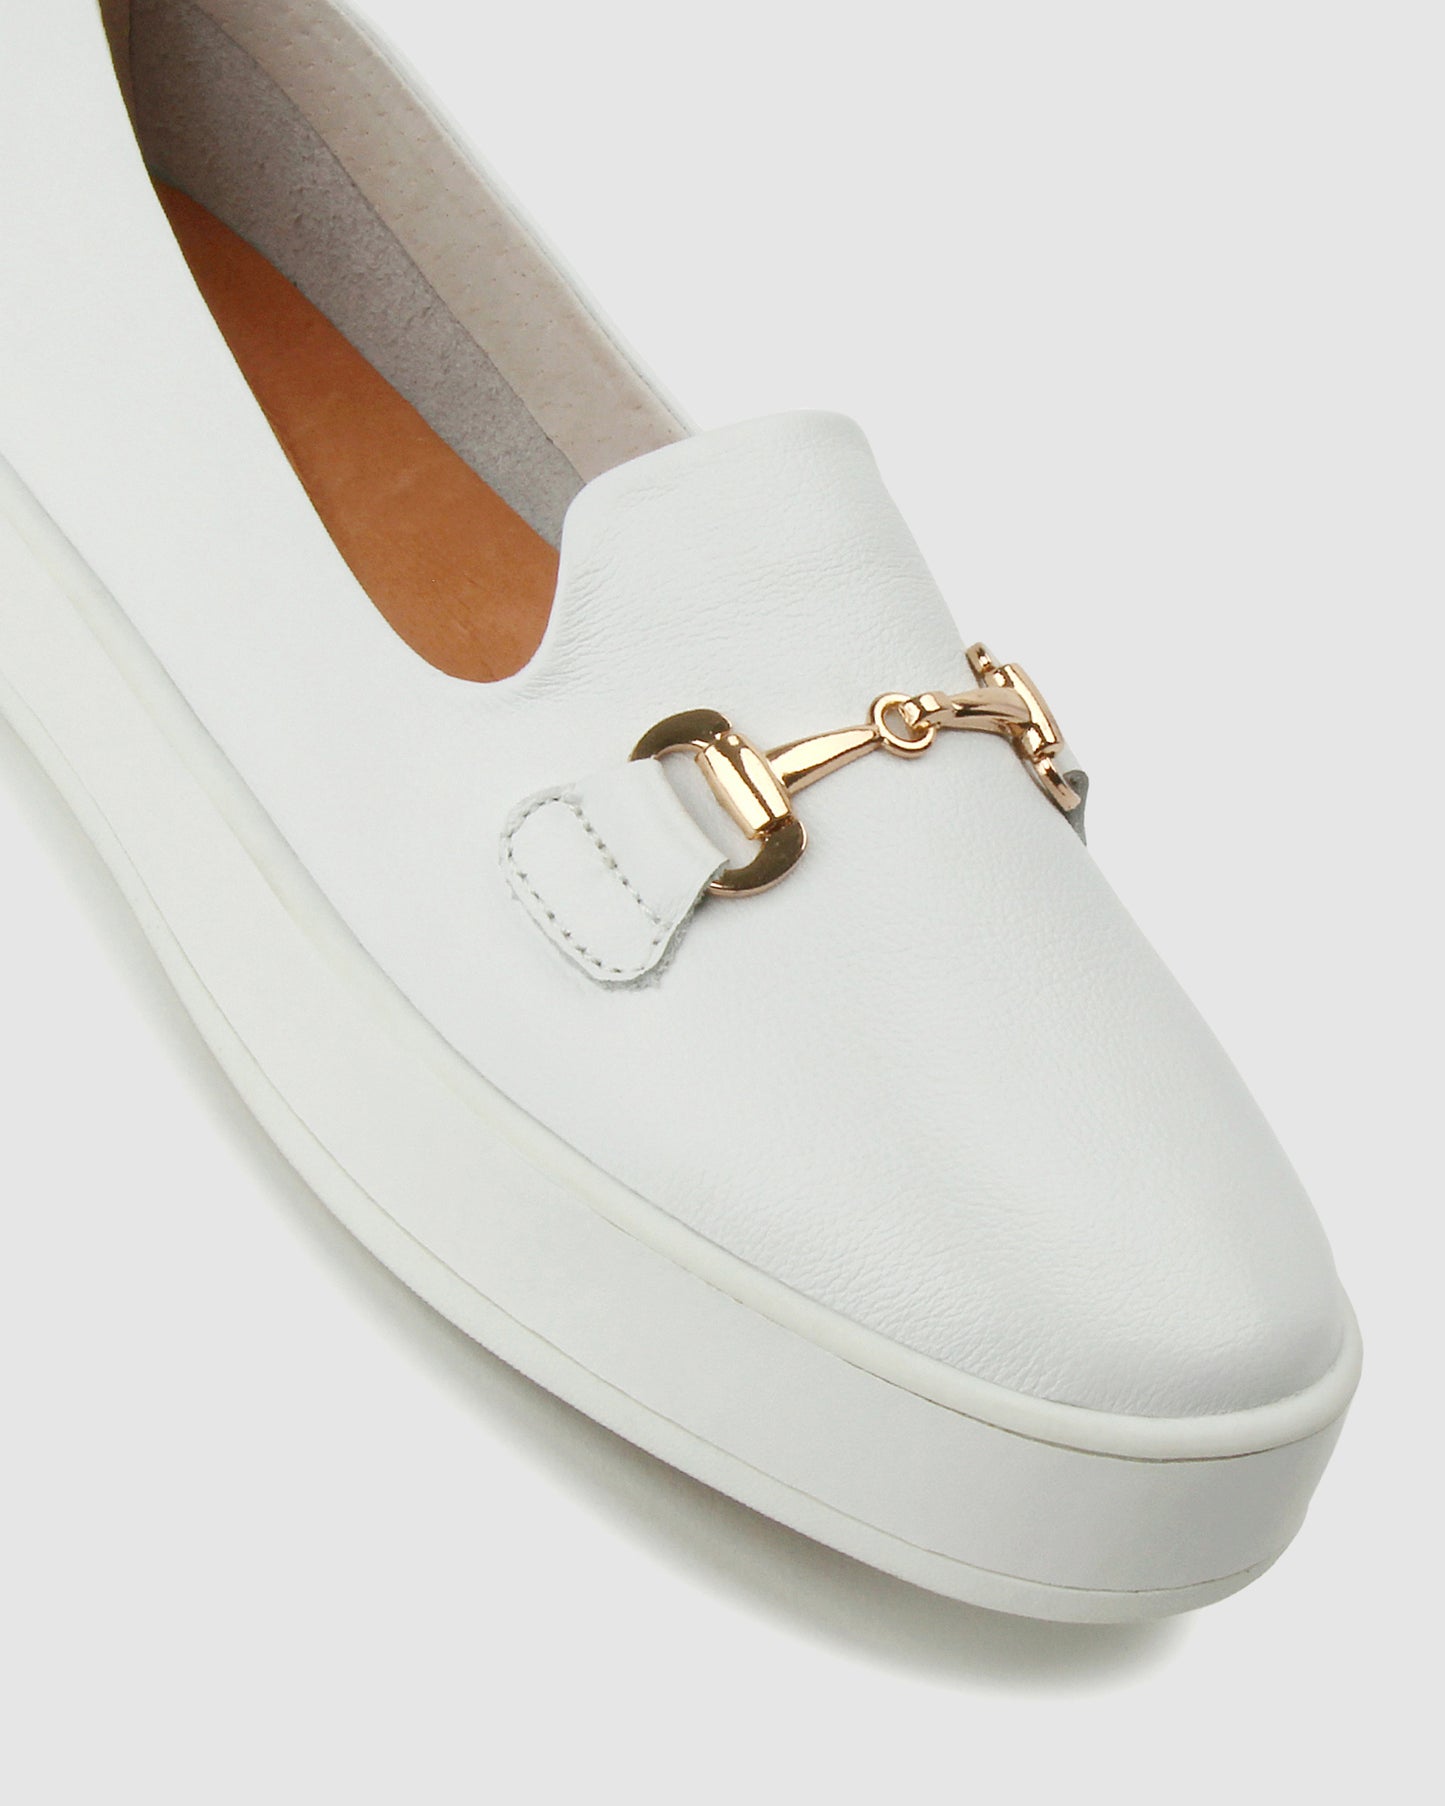 TEDDY Leather Comfort Loafers